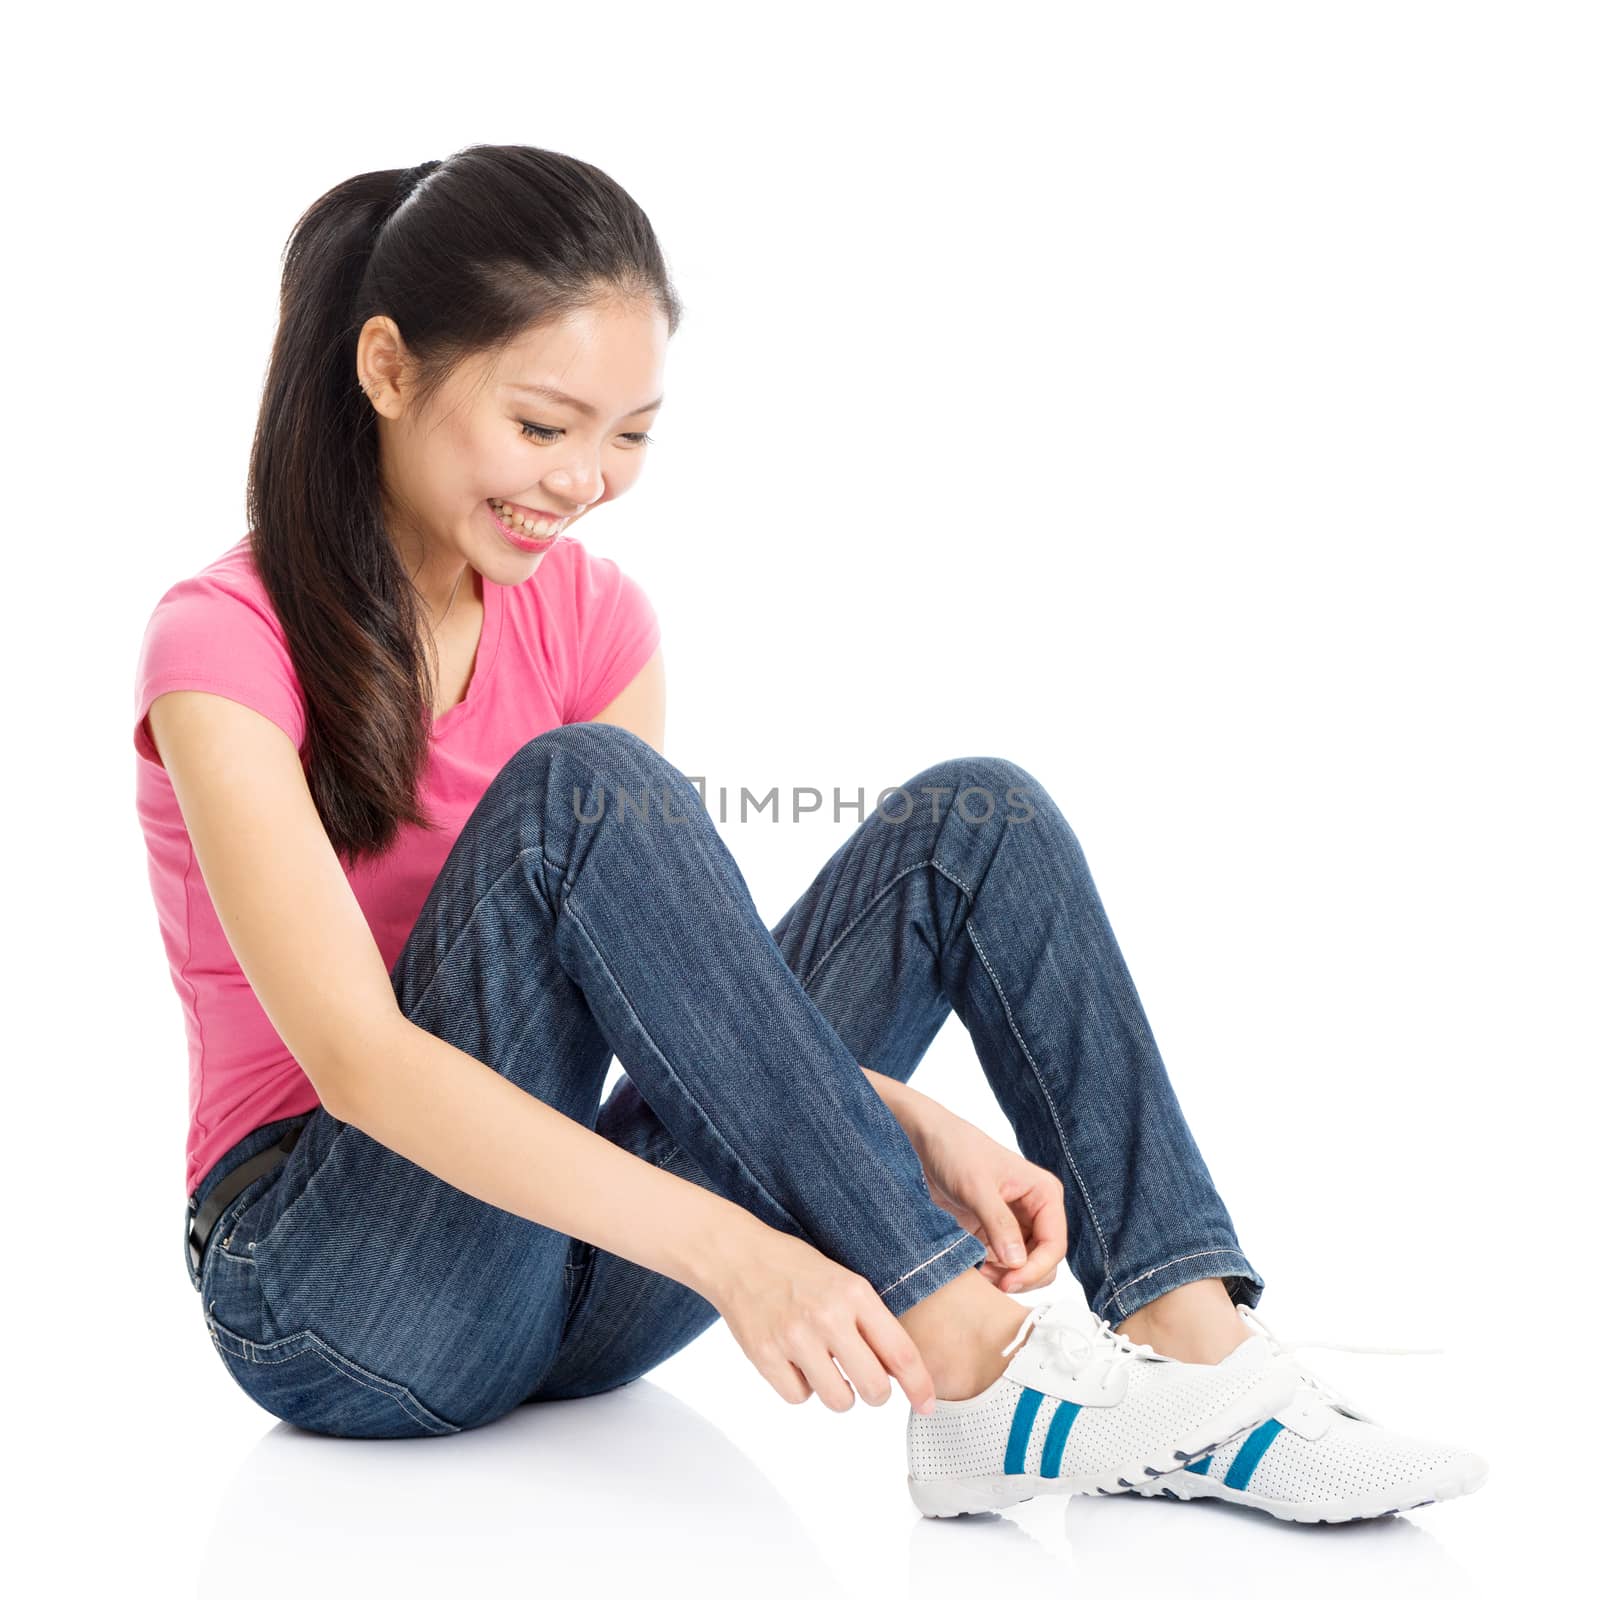 Portrait of young Asian girl in pink shirt and jeans wearing shoe, full body seated isolated on white background.